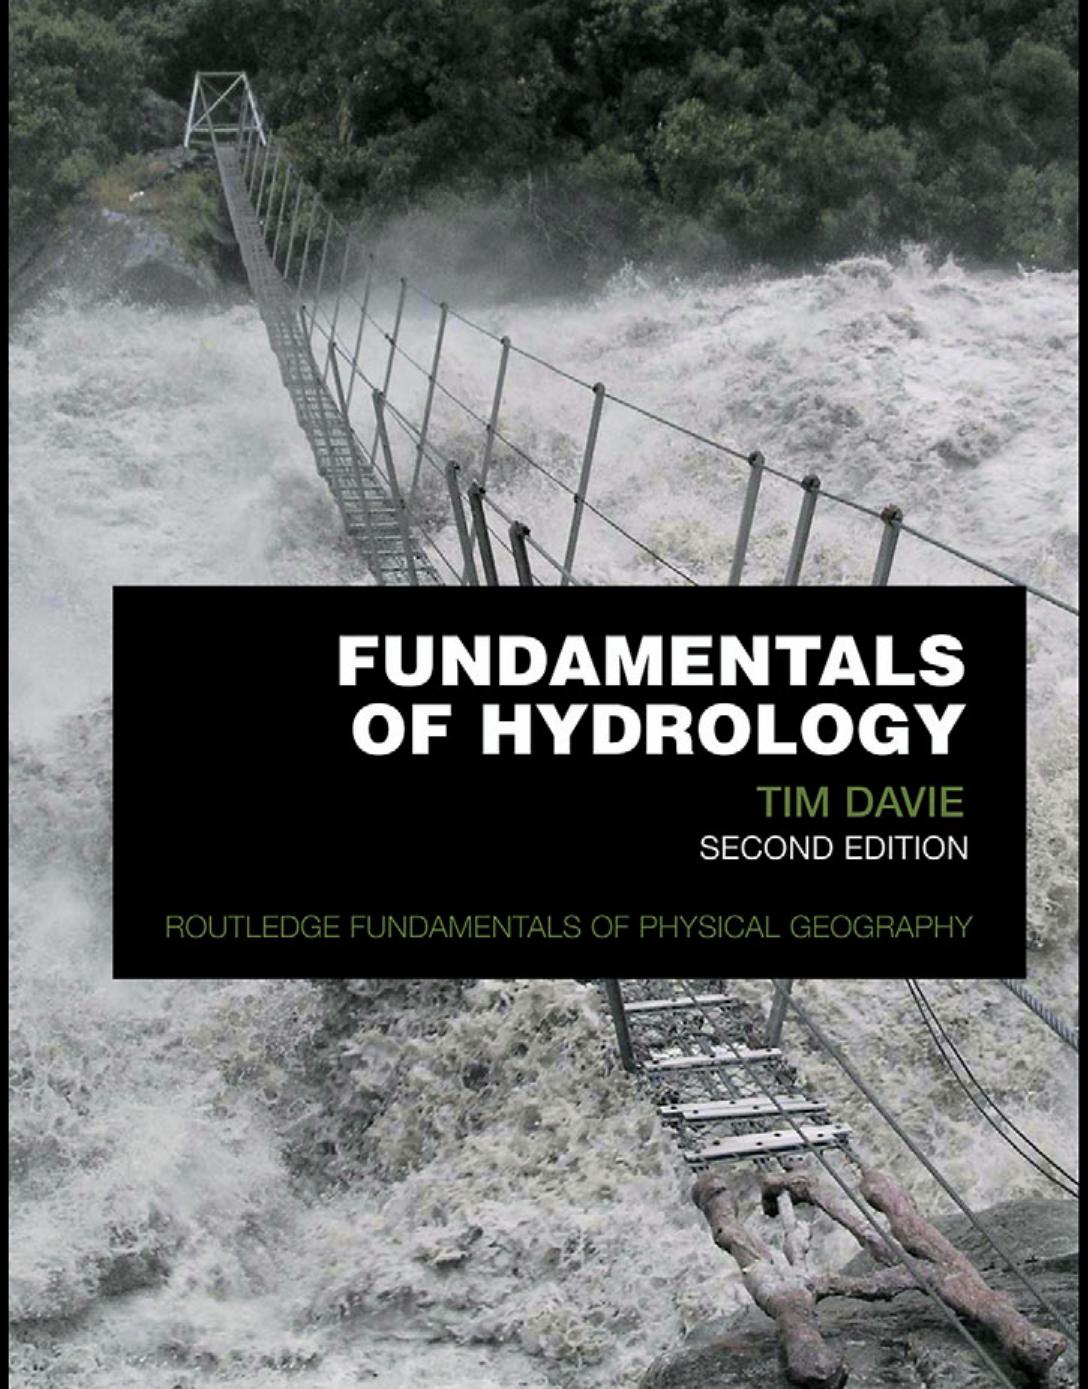 Fundamentals of Hydrology, Second Edition